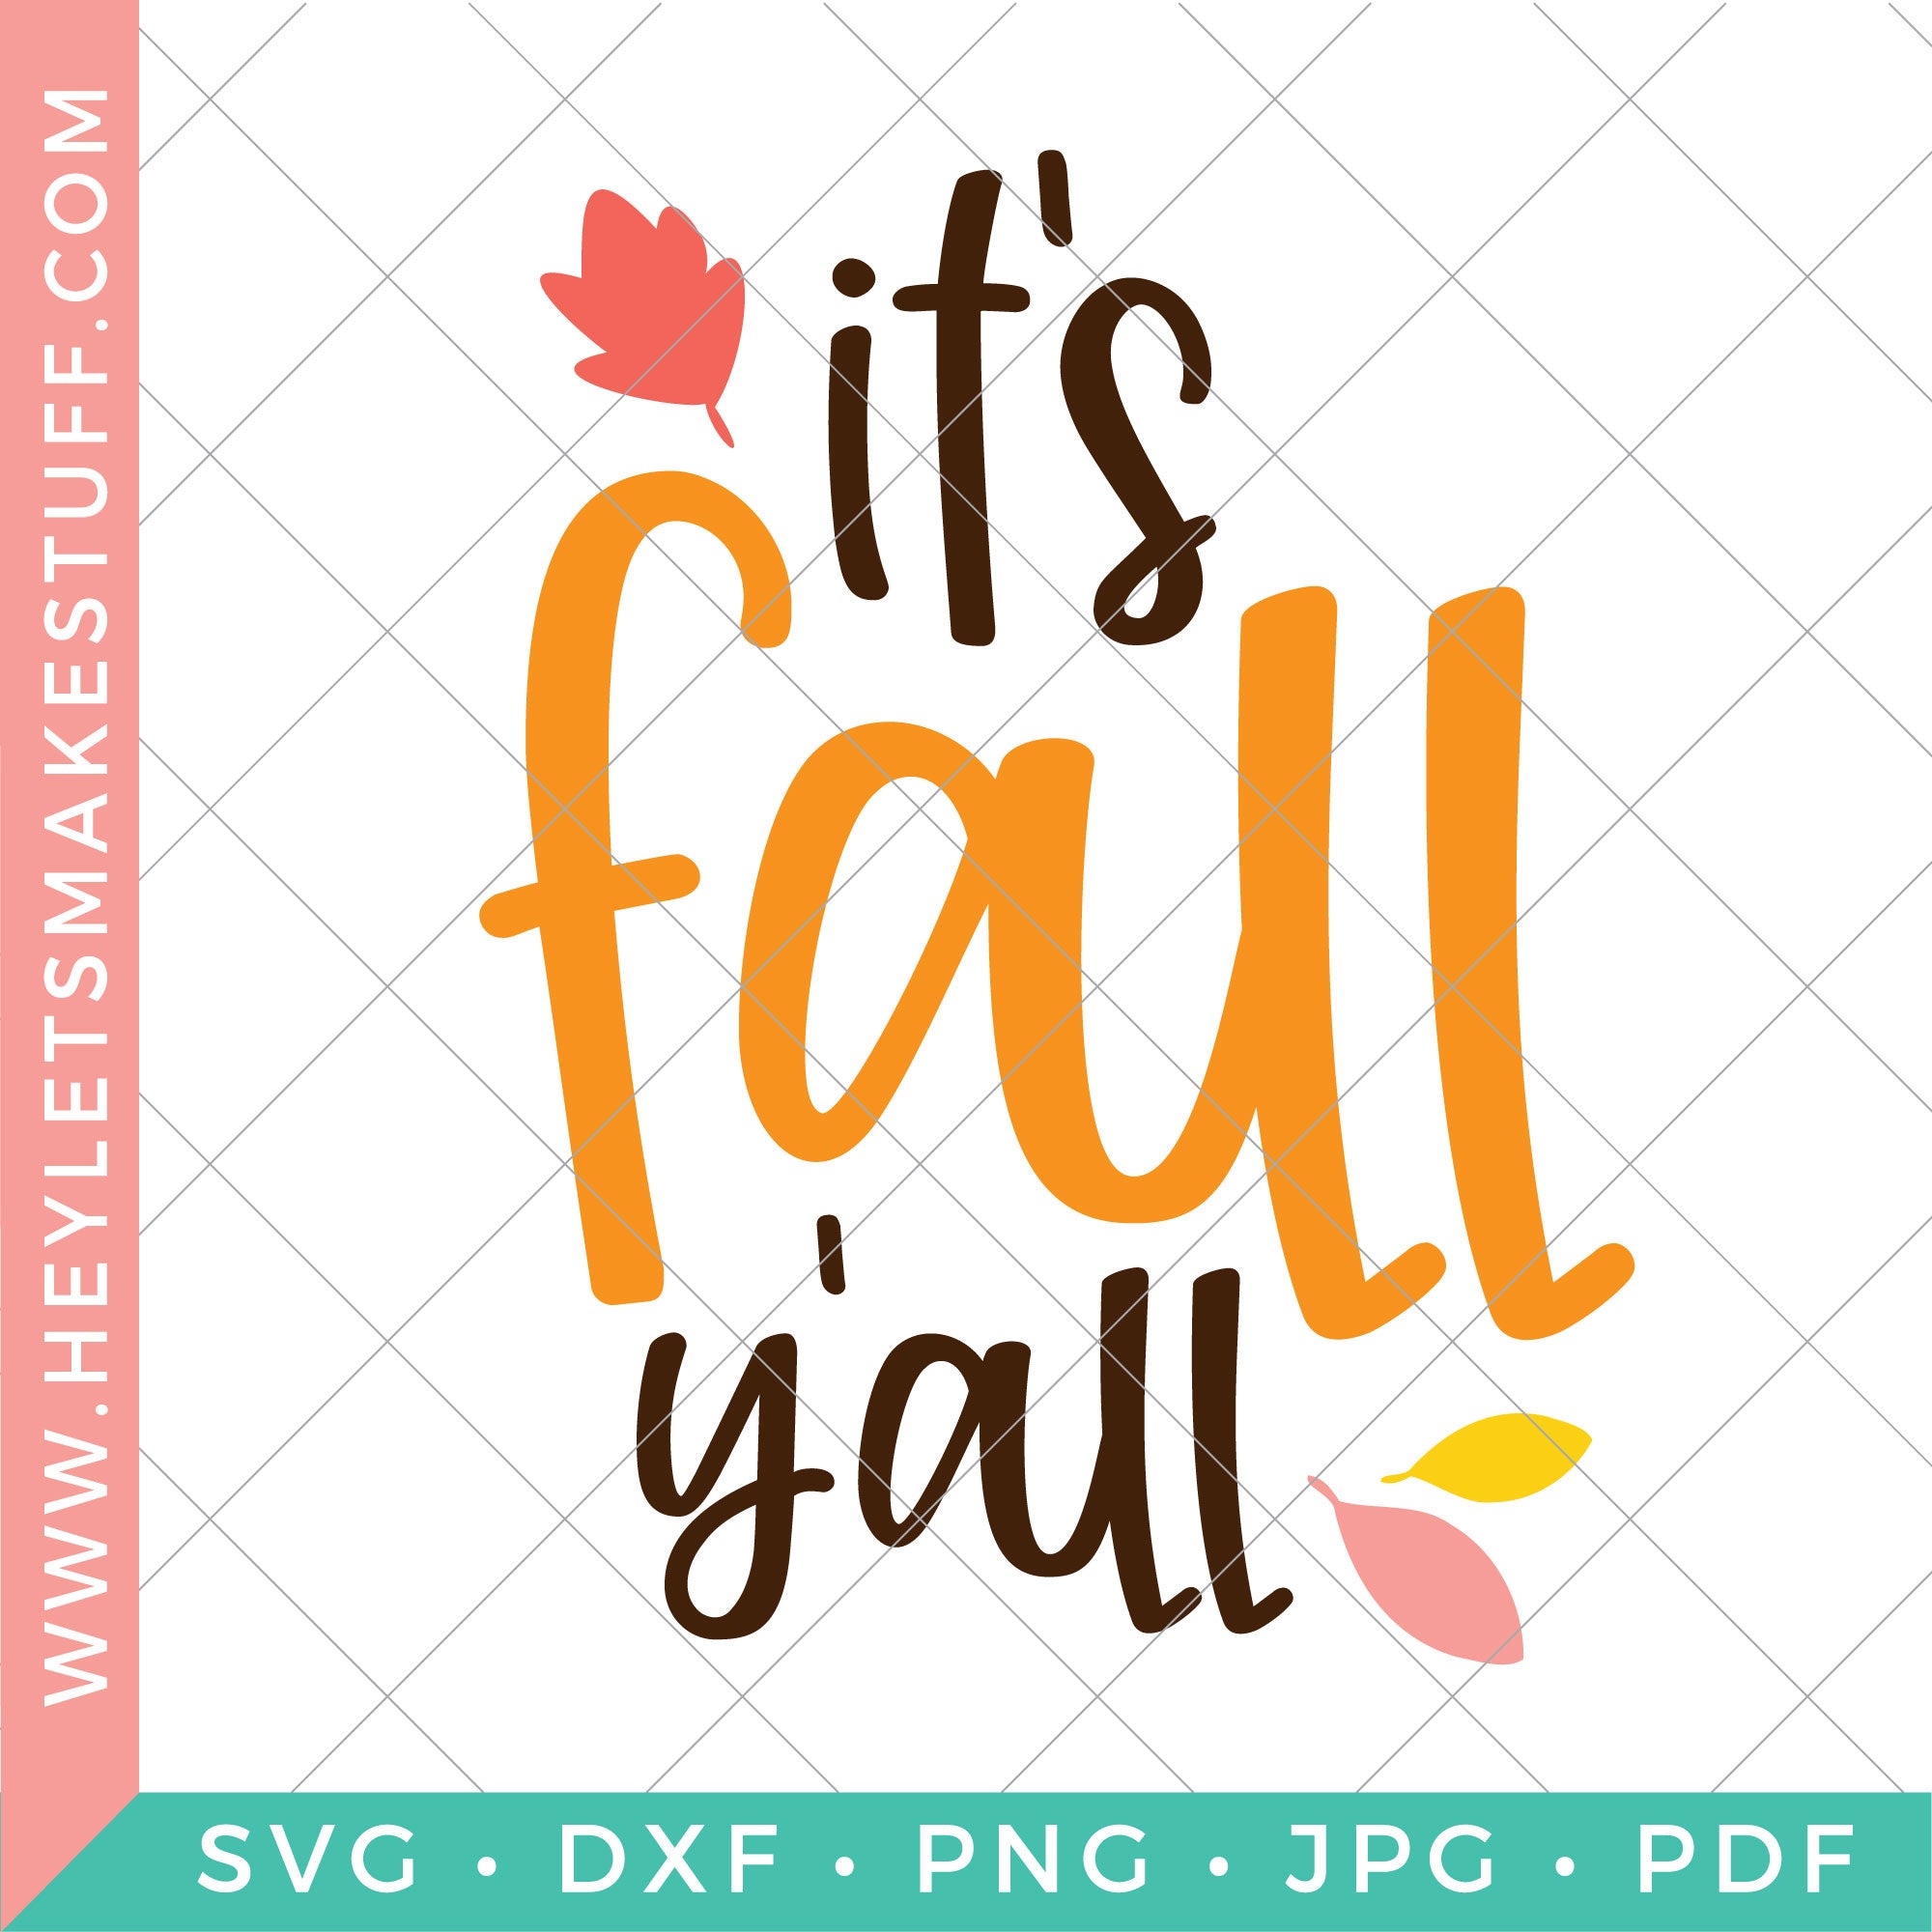 Download Fun Design For Fall And Halloween It S Fall Y All Svg Personal And Commercial Use Digital Art Collectibles Delage Com Br